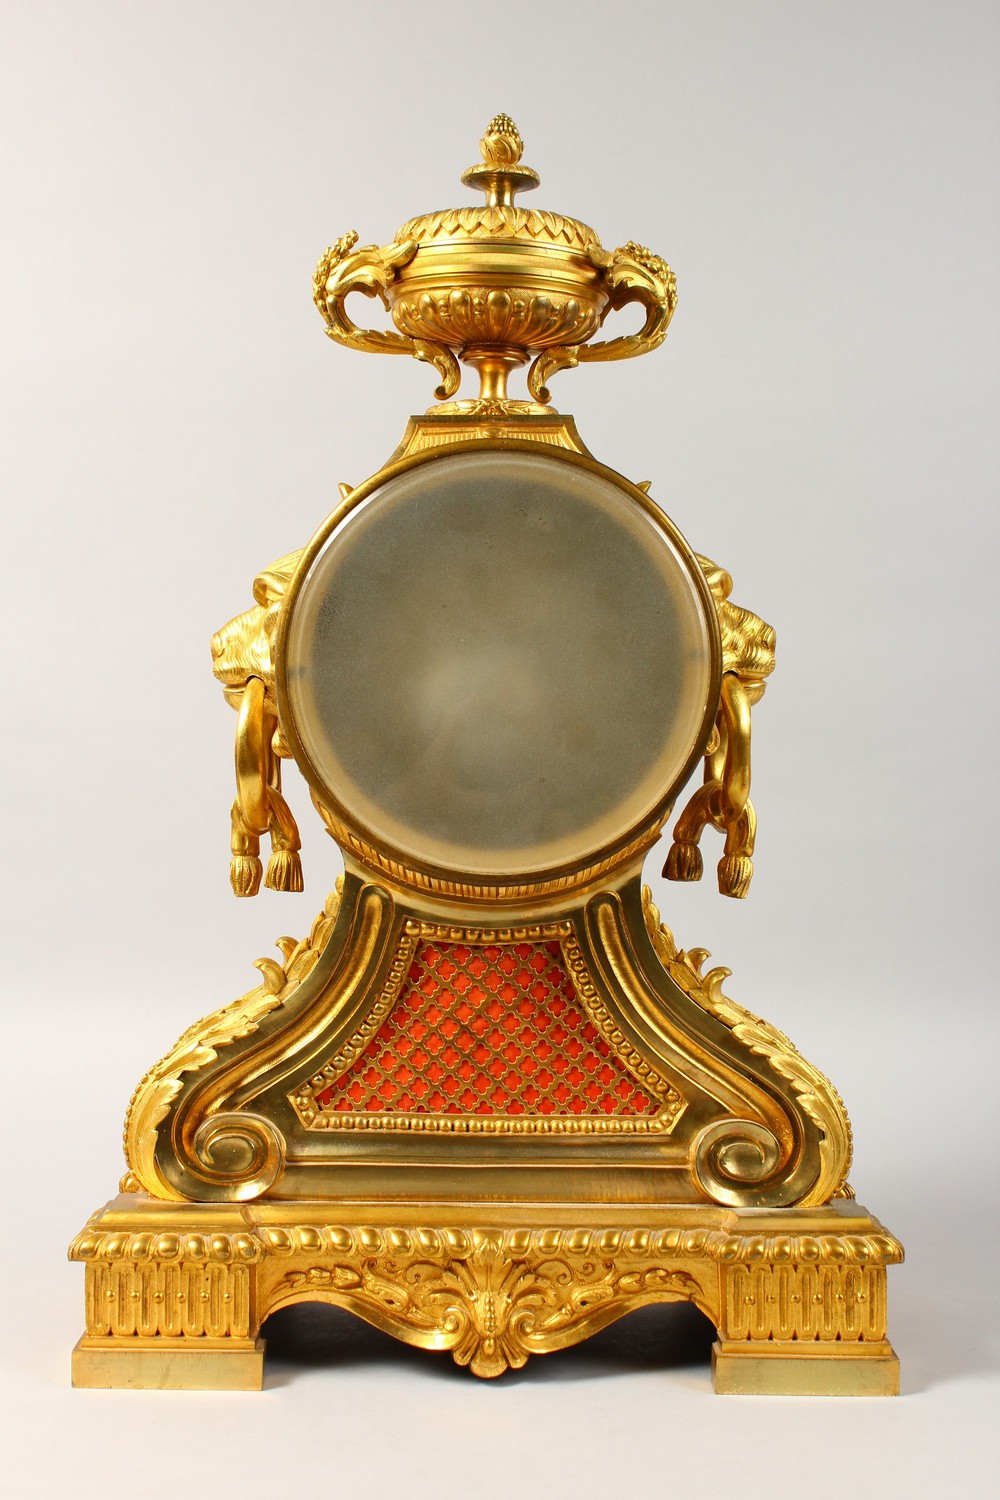 A GOOD 18TH CENTURY FRENCH ORMOLU CLOCK, with blue and white circular dial, eight-day movement - Image 7 of 8